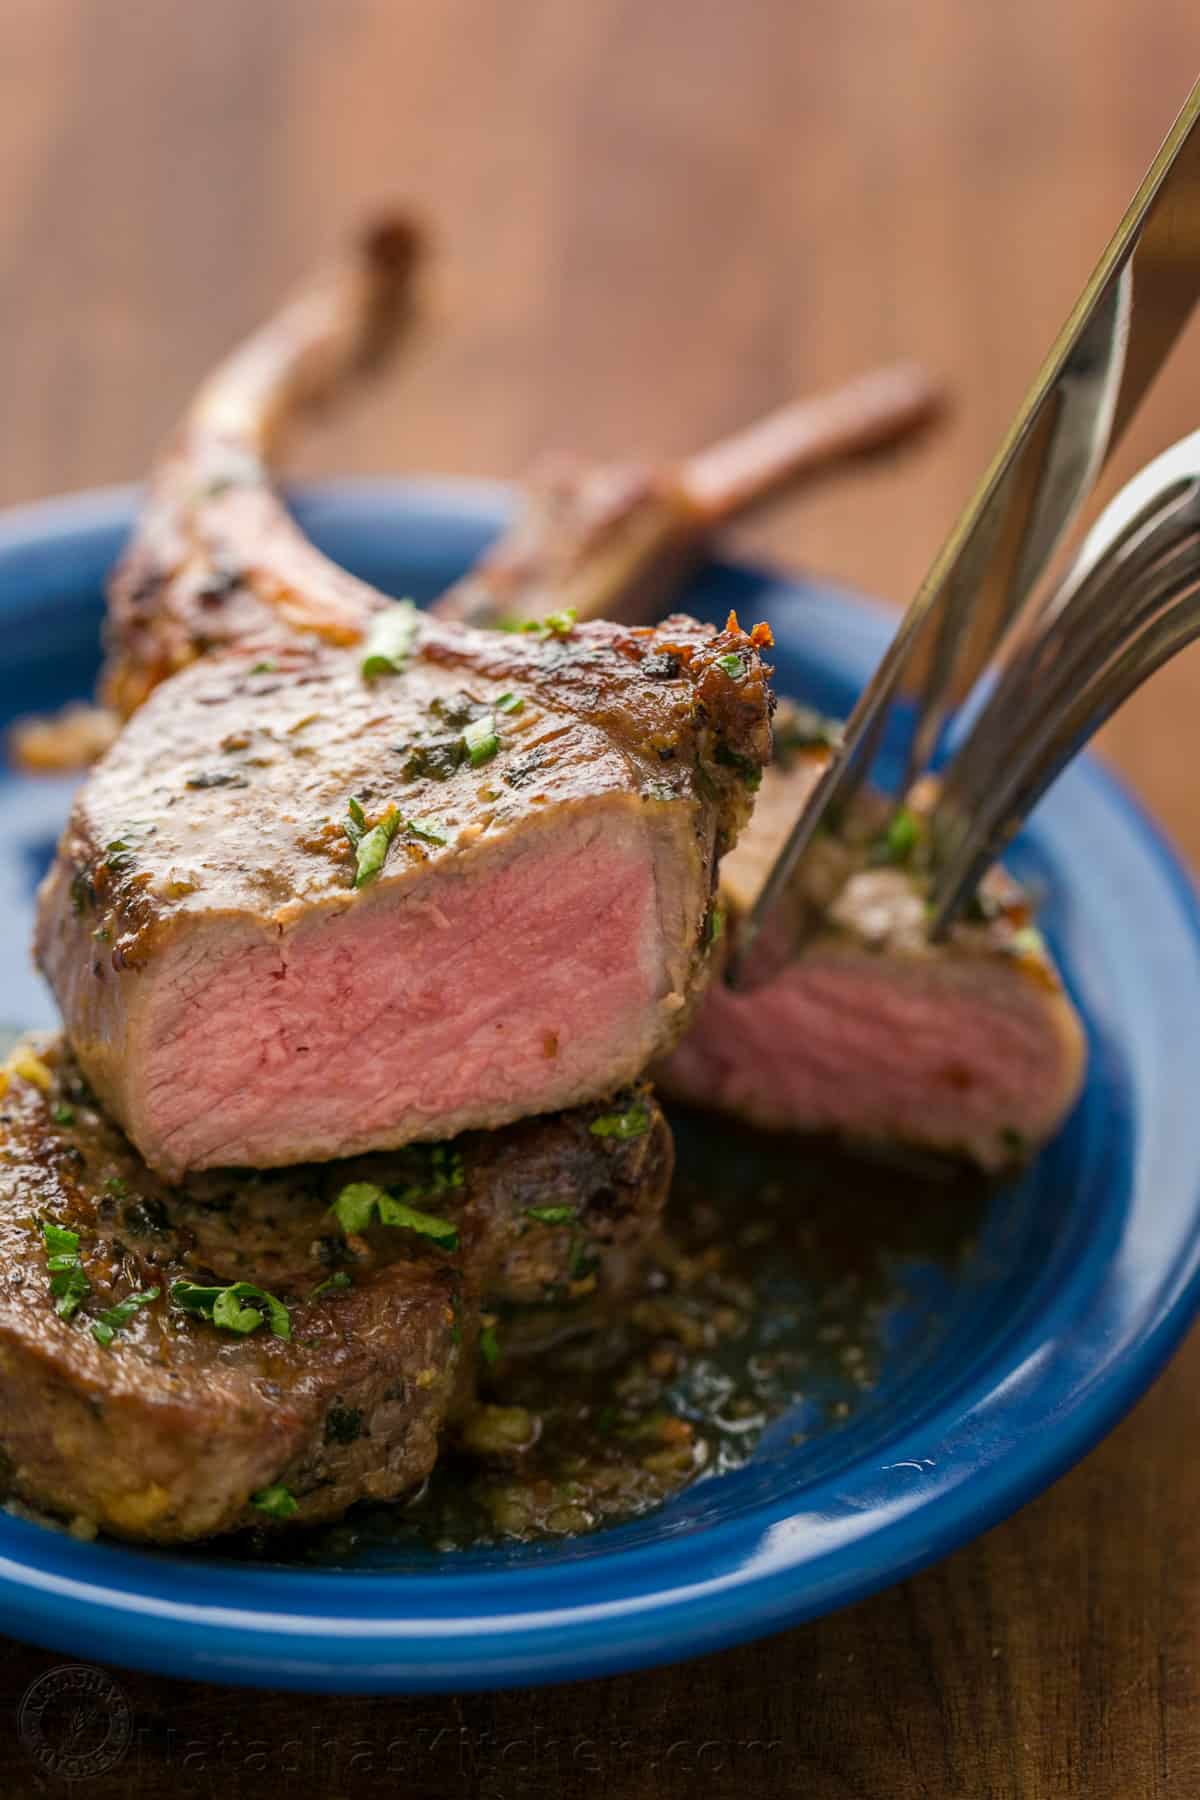 Sliced piece of lamb chop to show juicy center